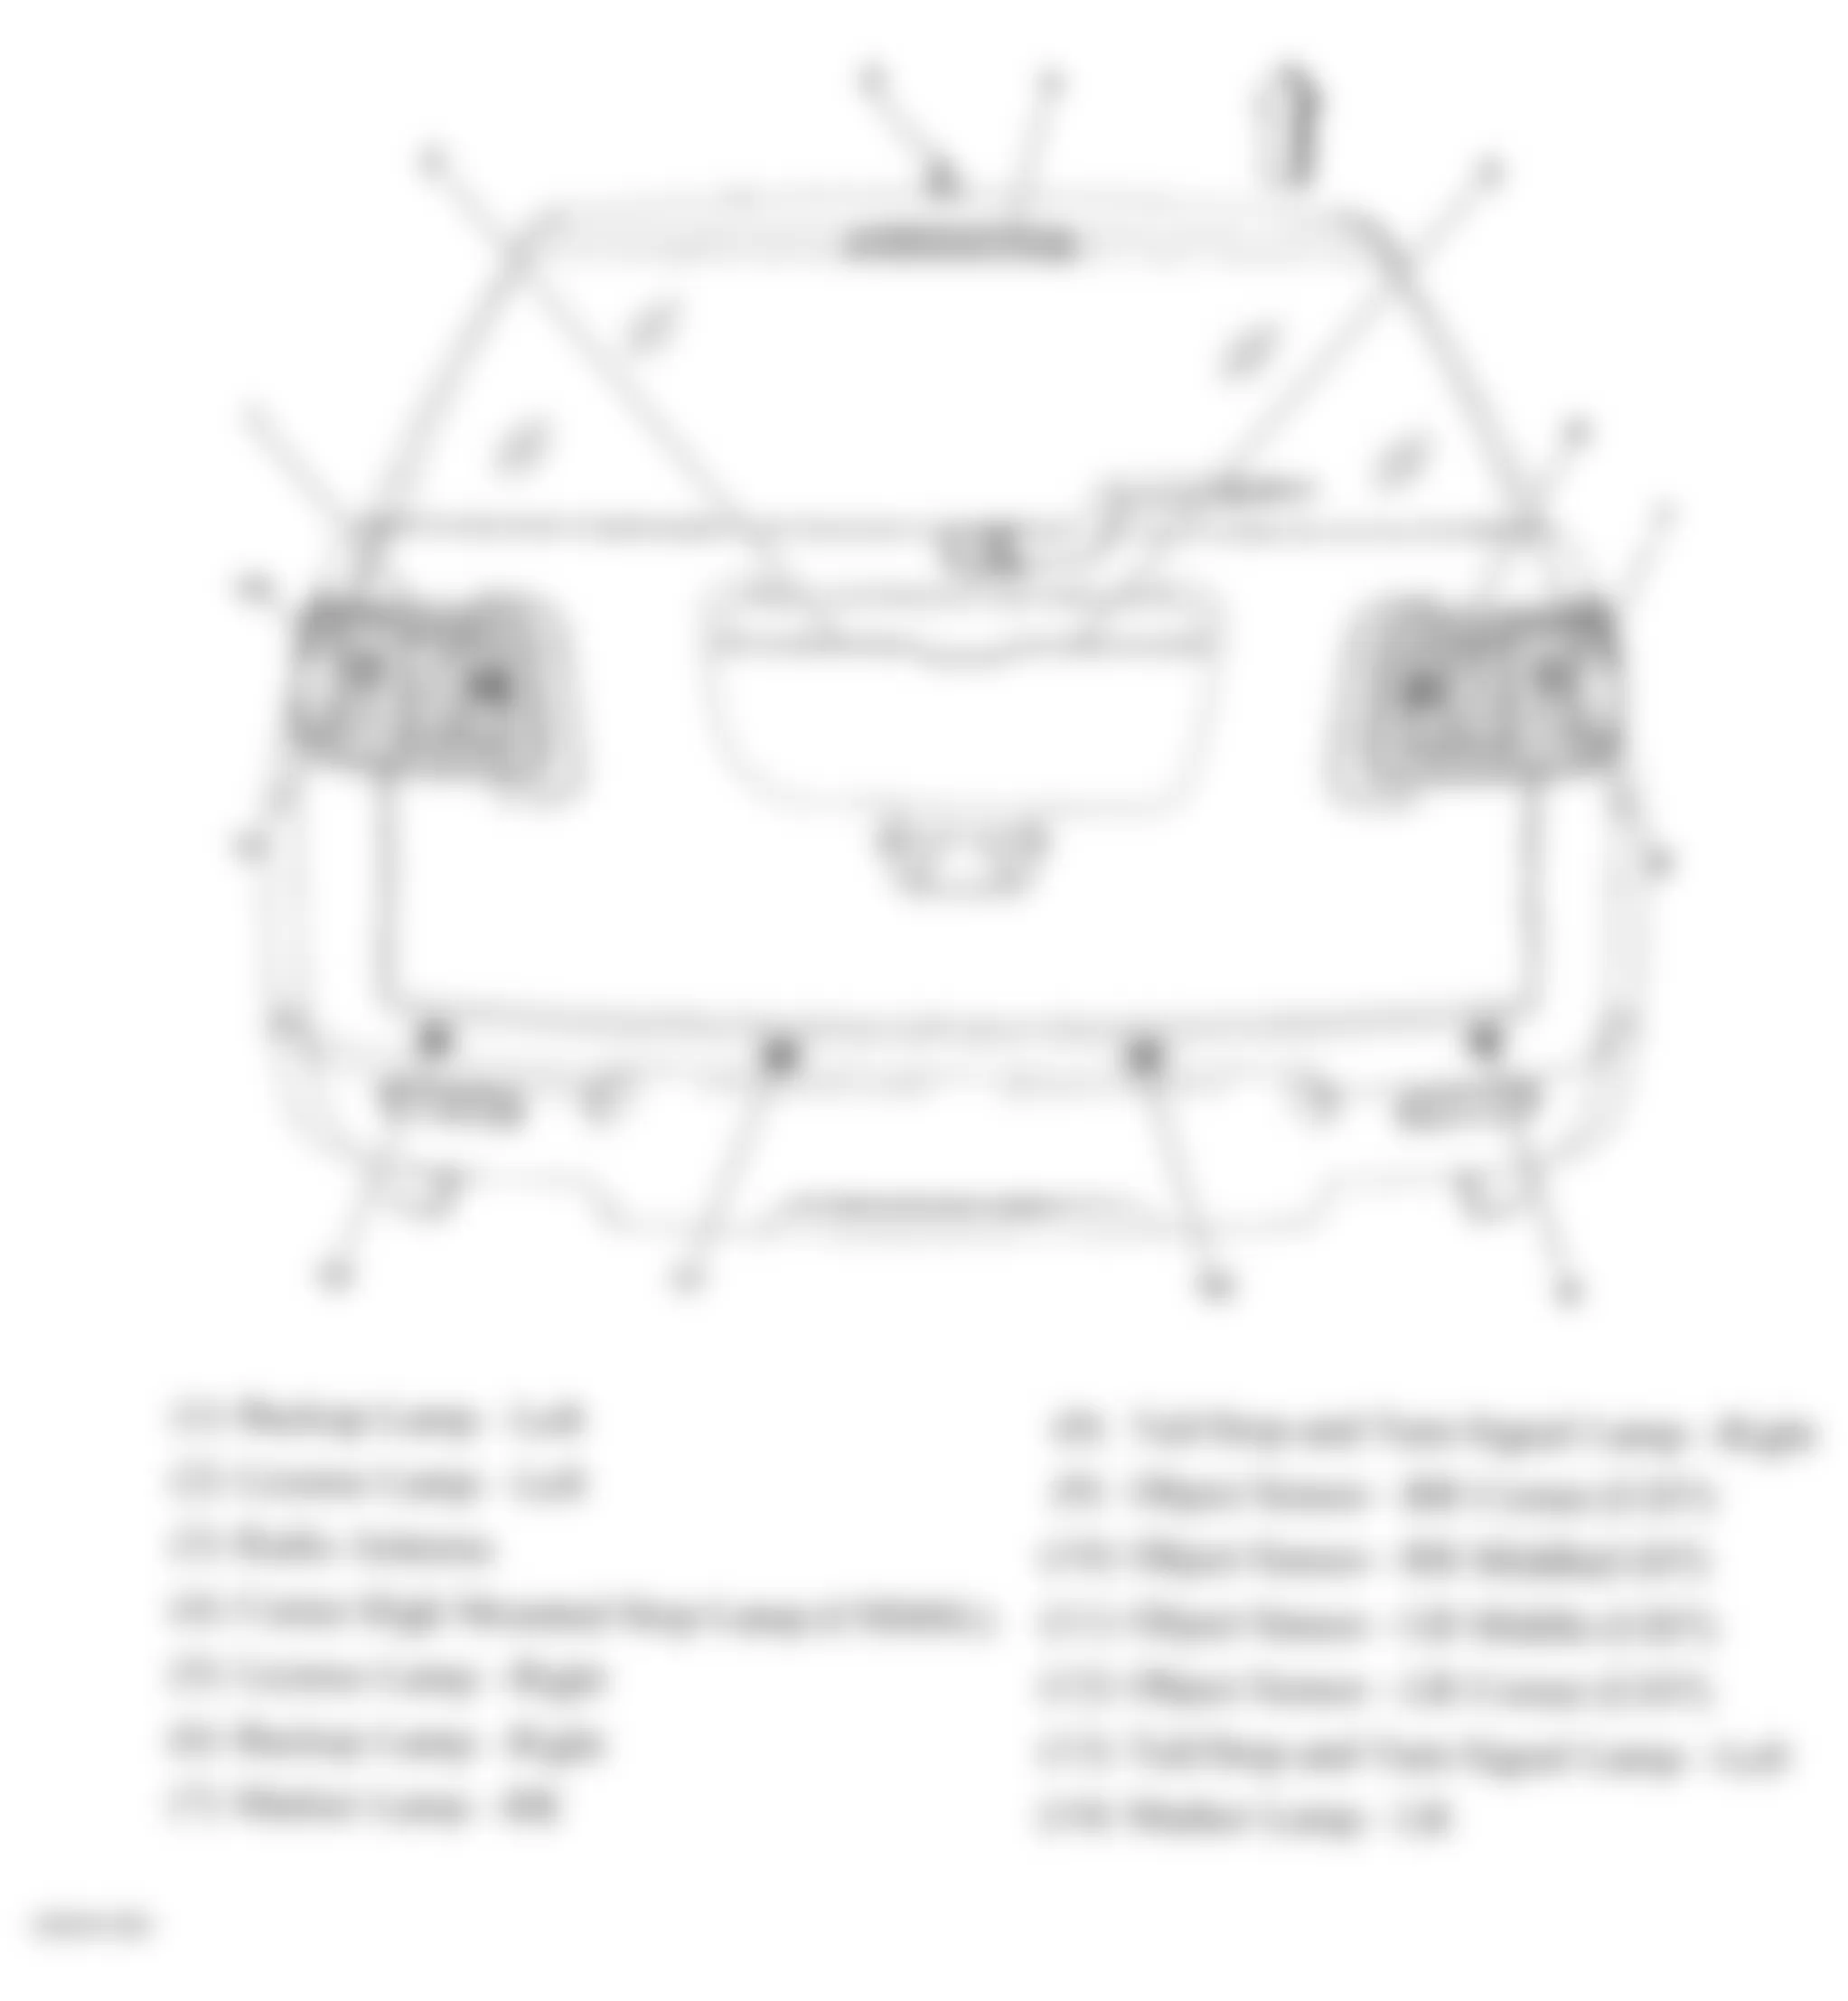 GMC Acadia SLE 2010 - Component Locations -  Rear Of Vehicle (Acadia & Outlook)